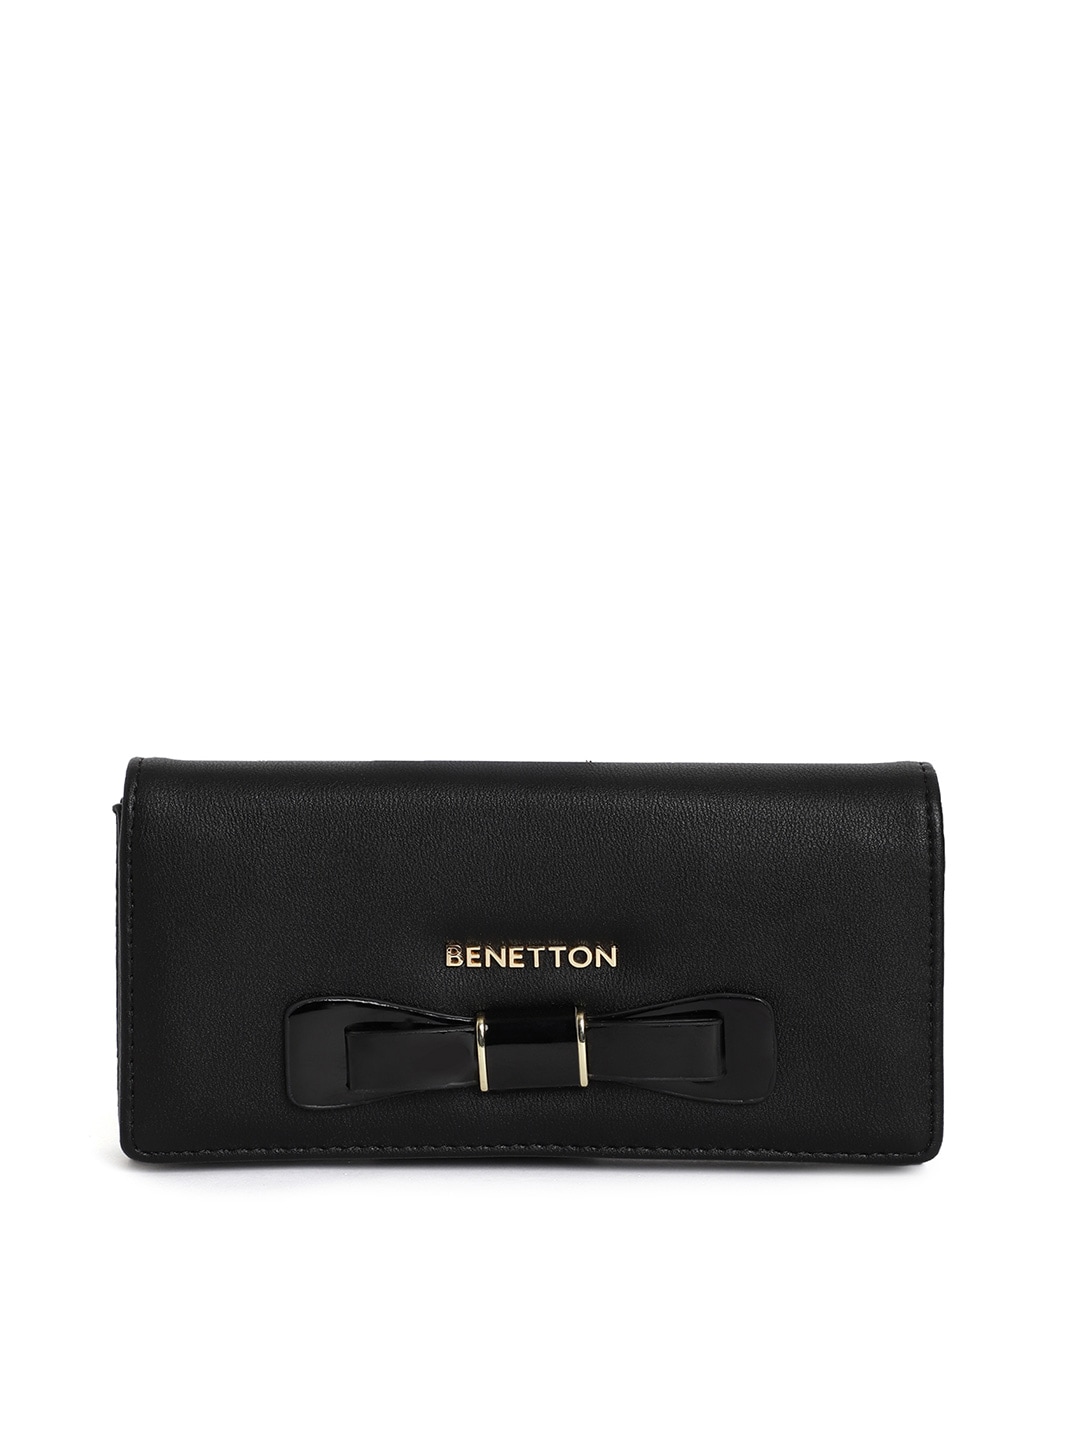 United Colors of Benetton Women Black Solid Two Fold Wallet Price in India